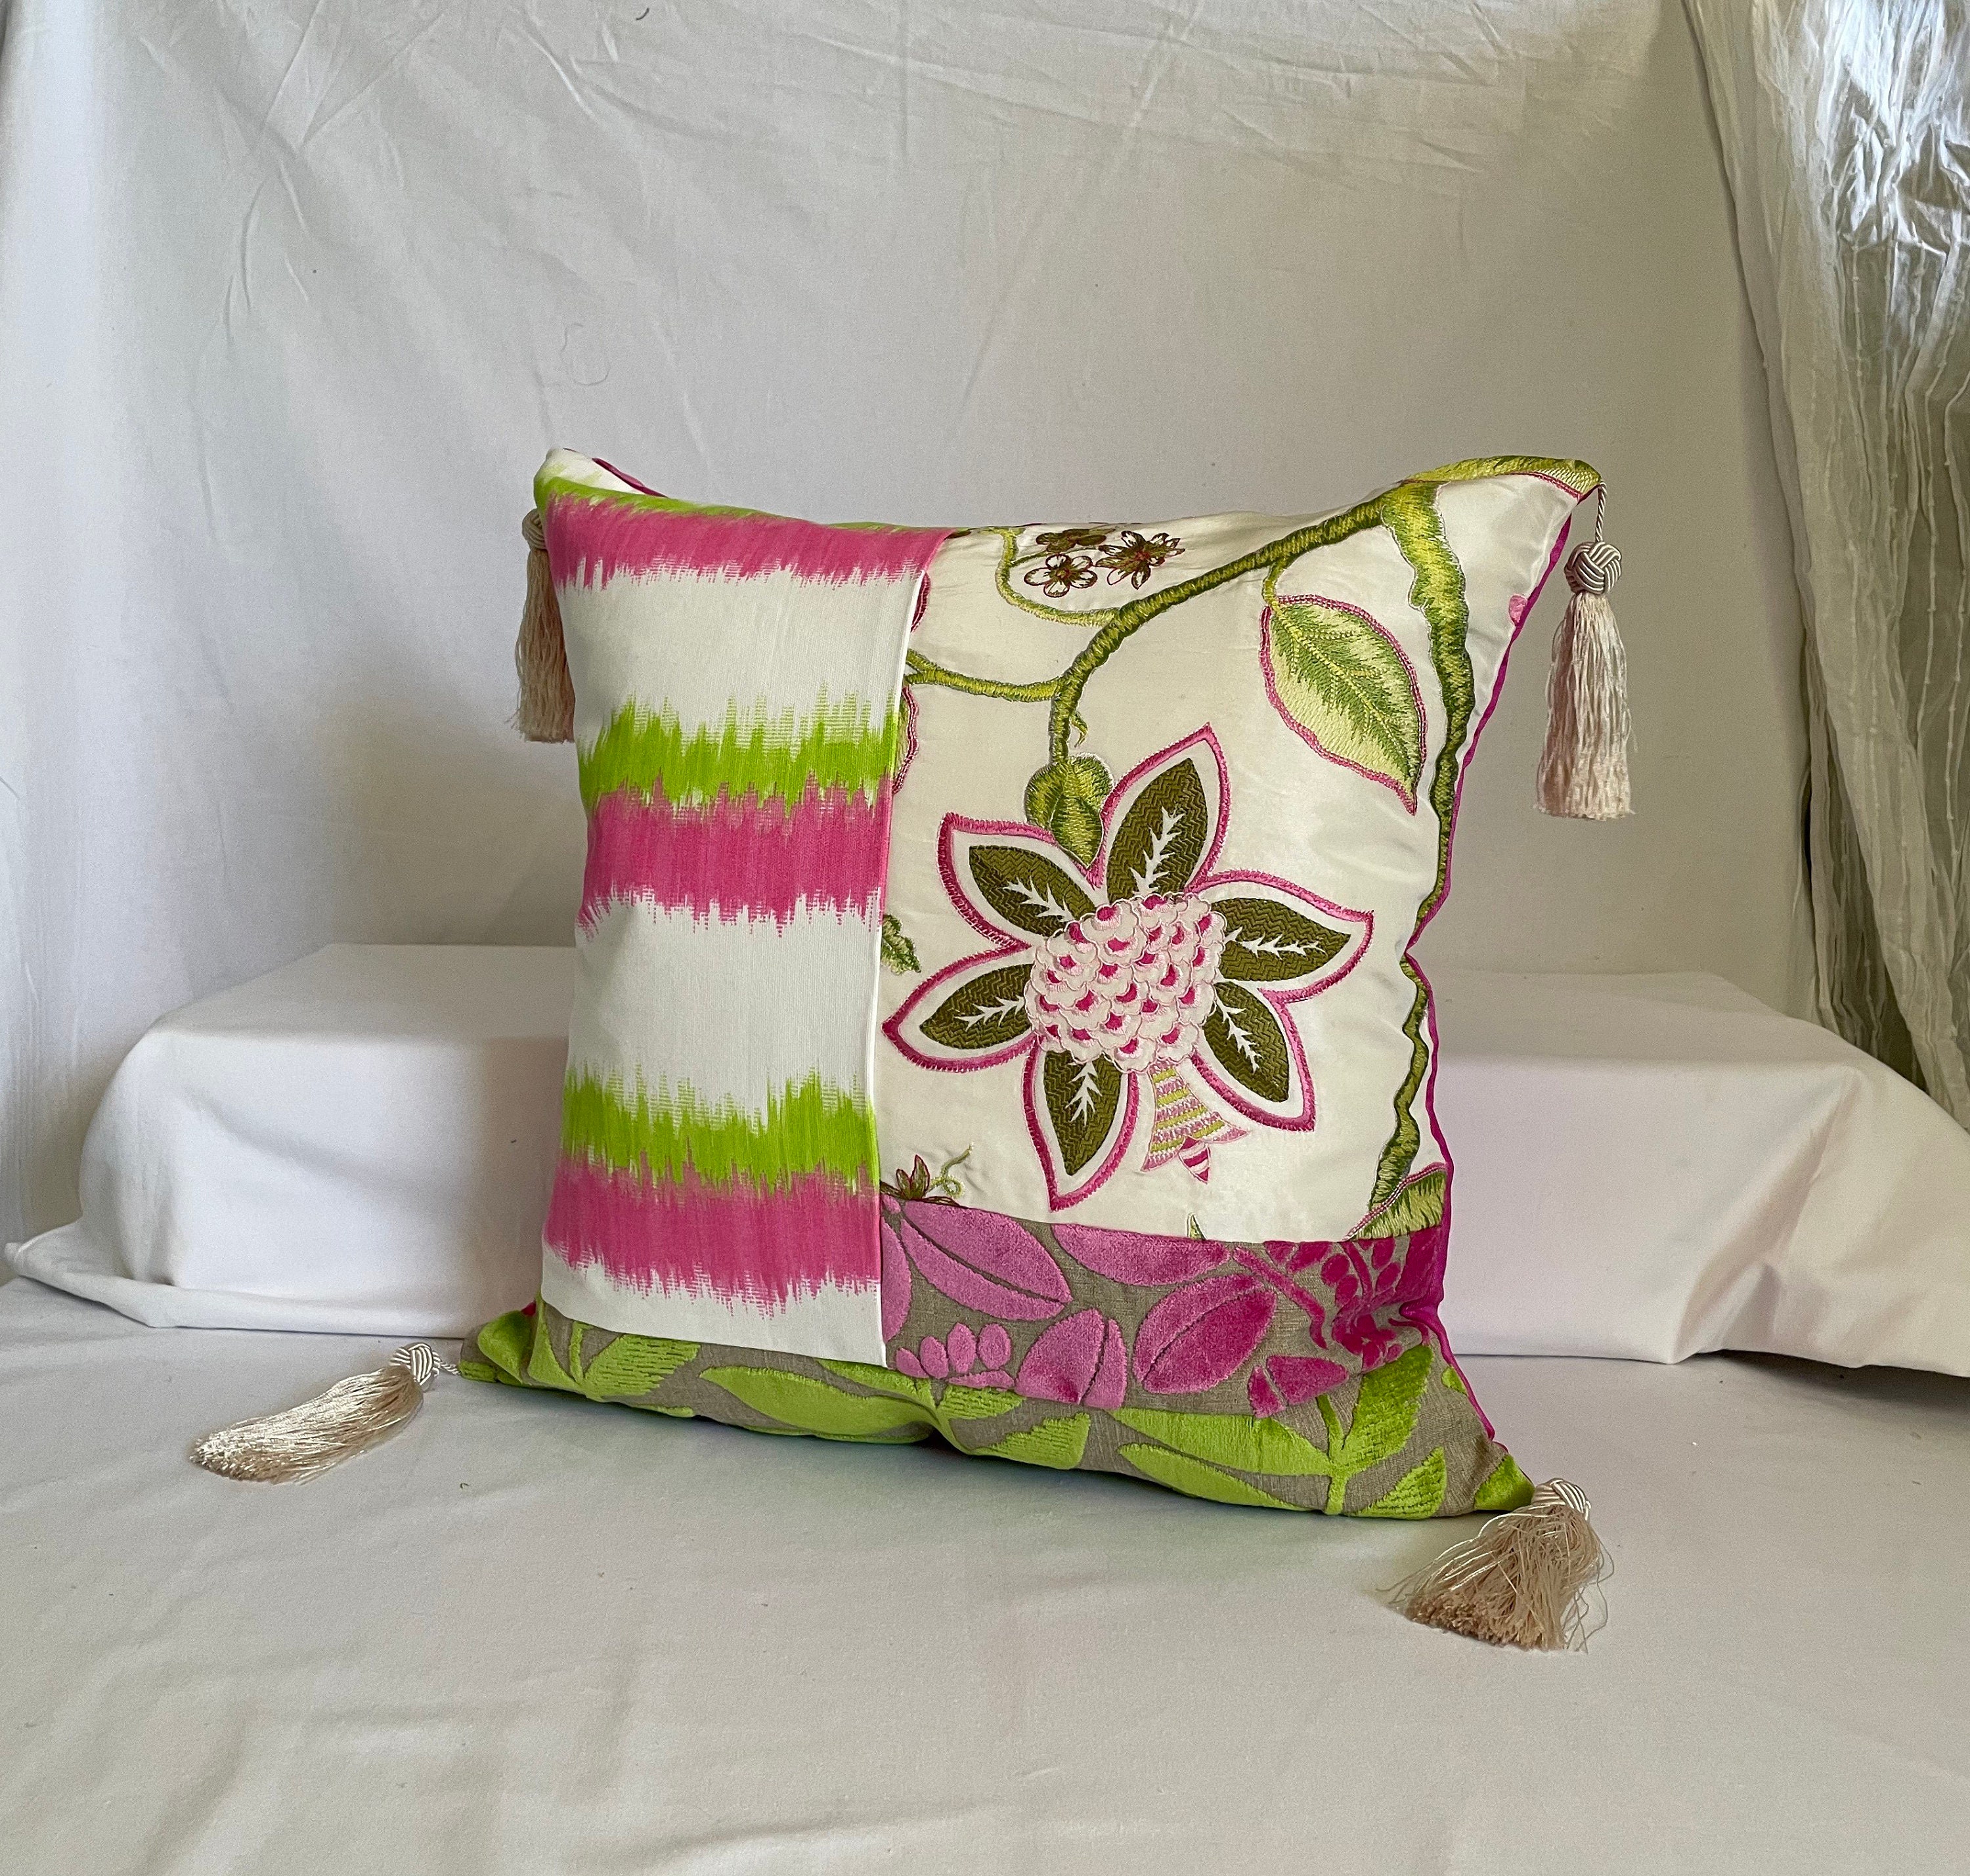 20”x 20” Manuel Canovas Romantic Style Jane Hall Design Embroidered Silk and Cut Velvet Decorative Pillows Cover Designers Guild